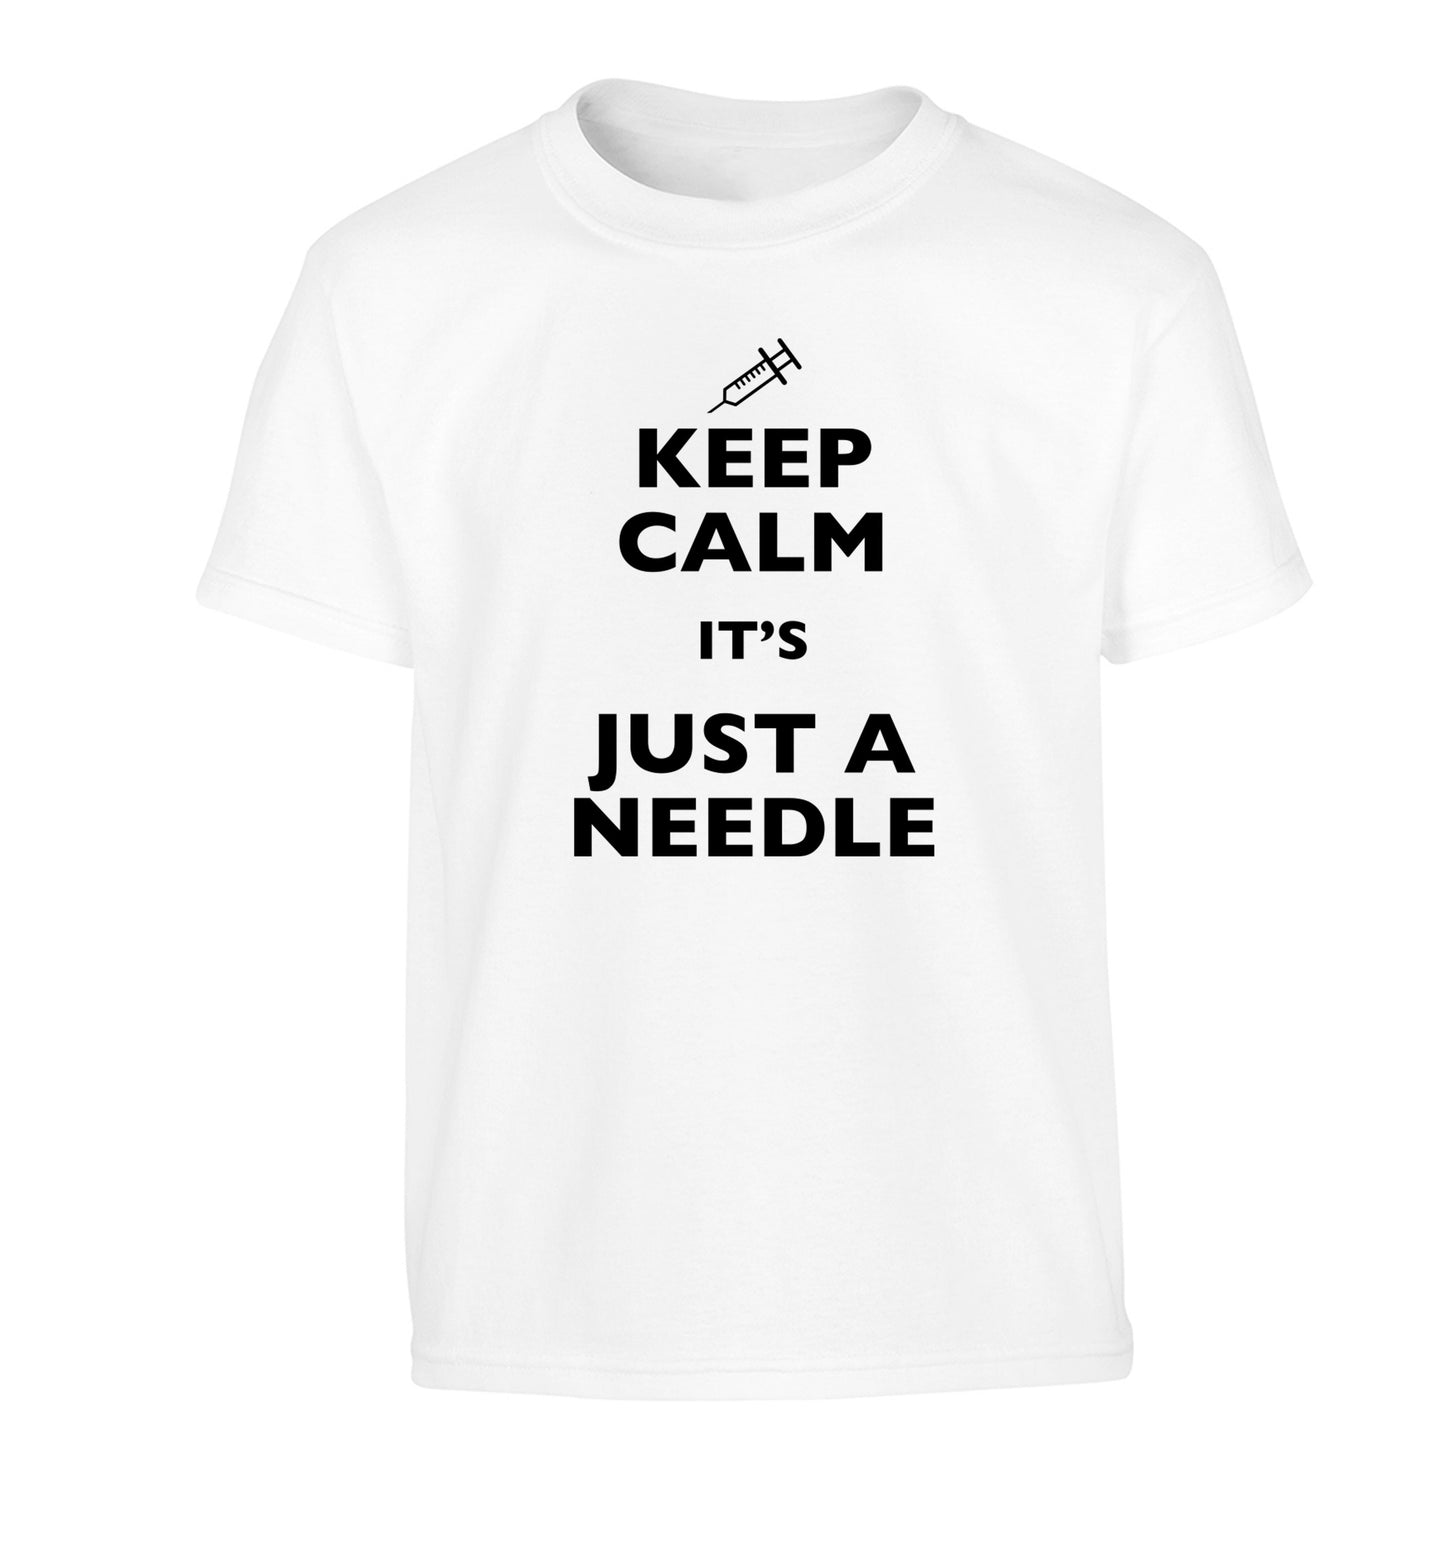 Keep calm it's only a needle Children's white Tshirt 12-14 Years